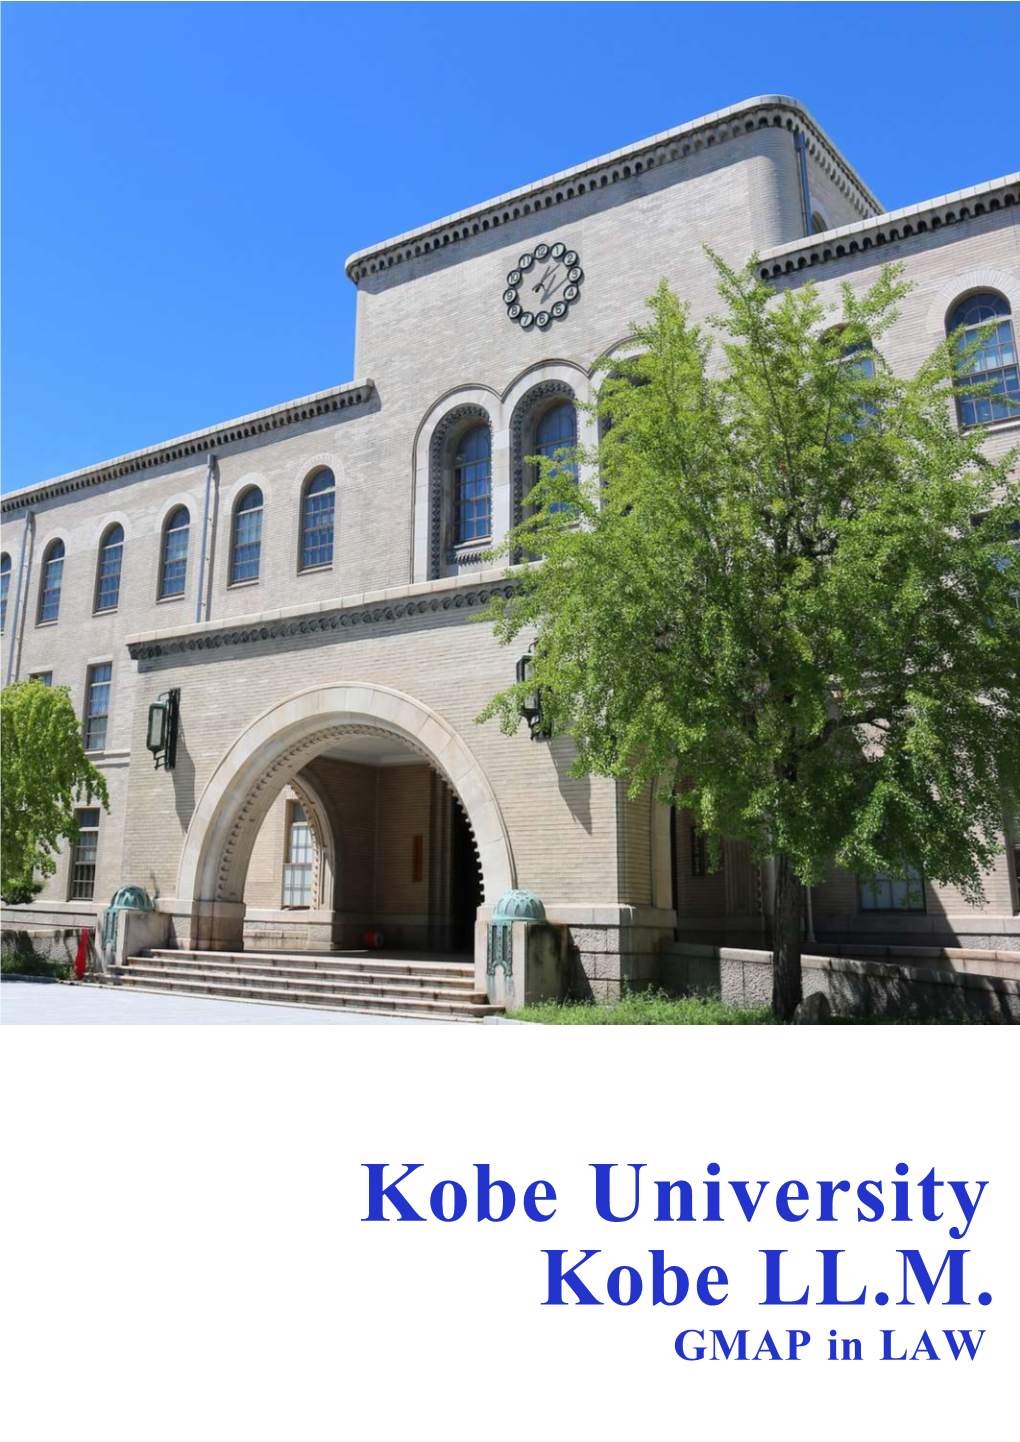 Kobe University School of Law Comprises About 1,100 Students (800 JPY1,353,600 (Approx